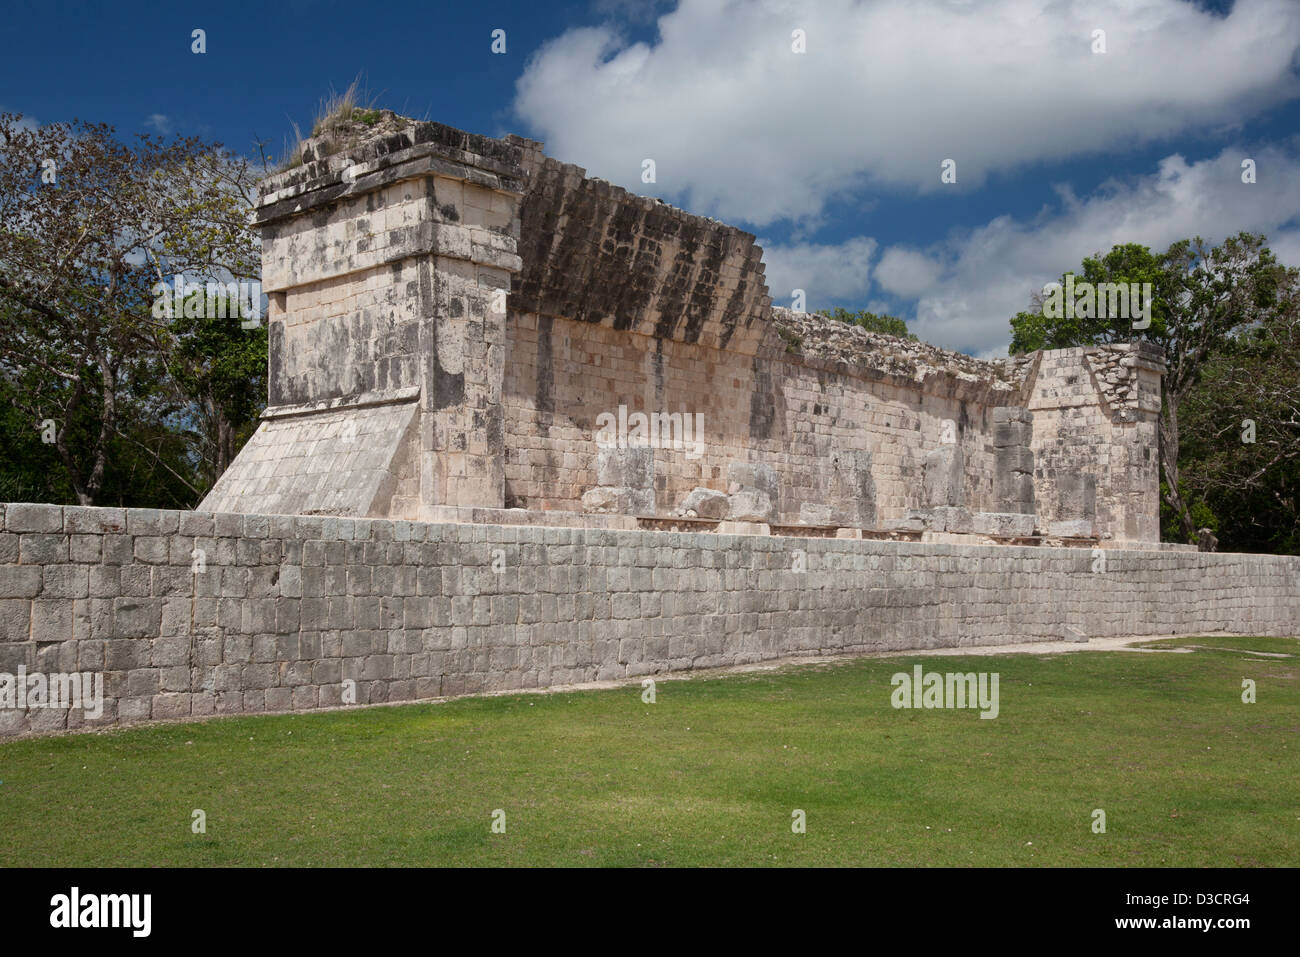 The Southern Temple at the South end of The Great Ball Court, Chichen Itza, Mexico Stock Photo